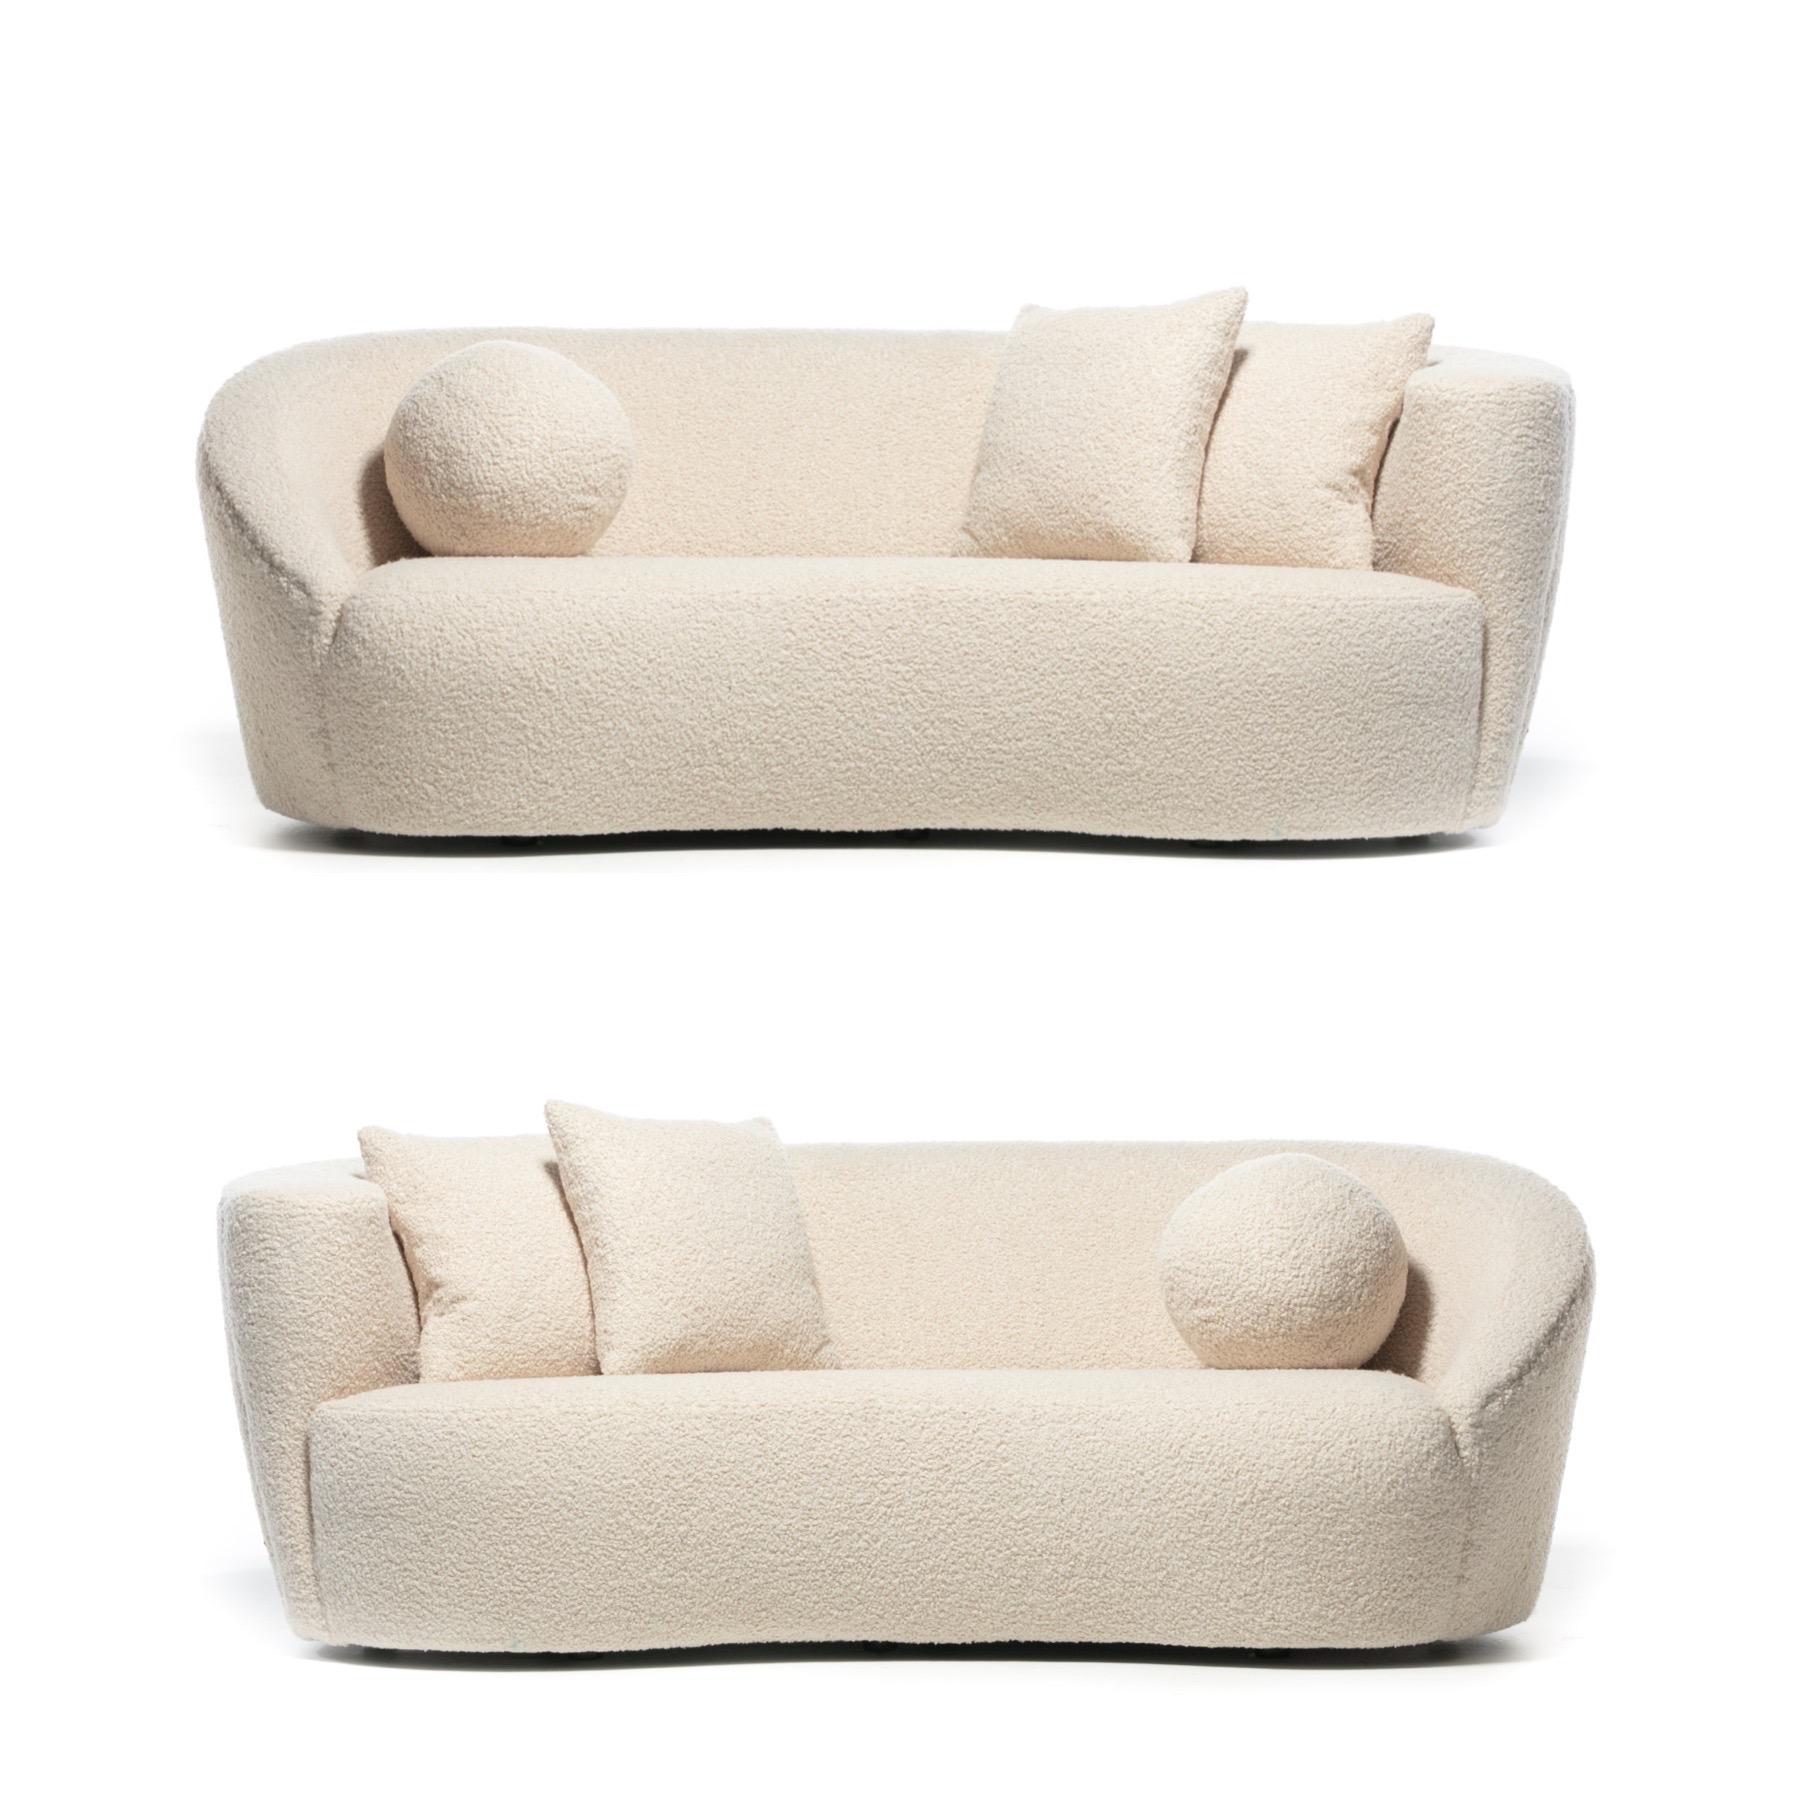 Mirroring pair of newly and professionally reupholstered Post Modern Nautilus sofas in ivory white bouclé by acclaimed designer Vladimir Kagan and made by Directional circa 1990. Known for his love of amorphous shapes and curves, each of these